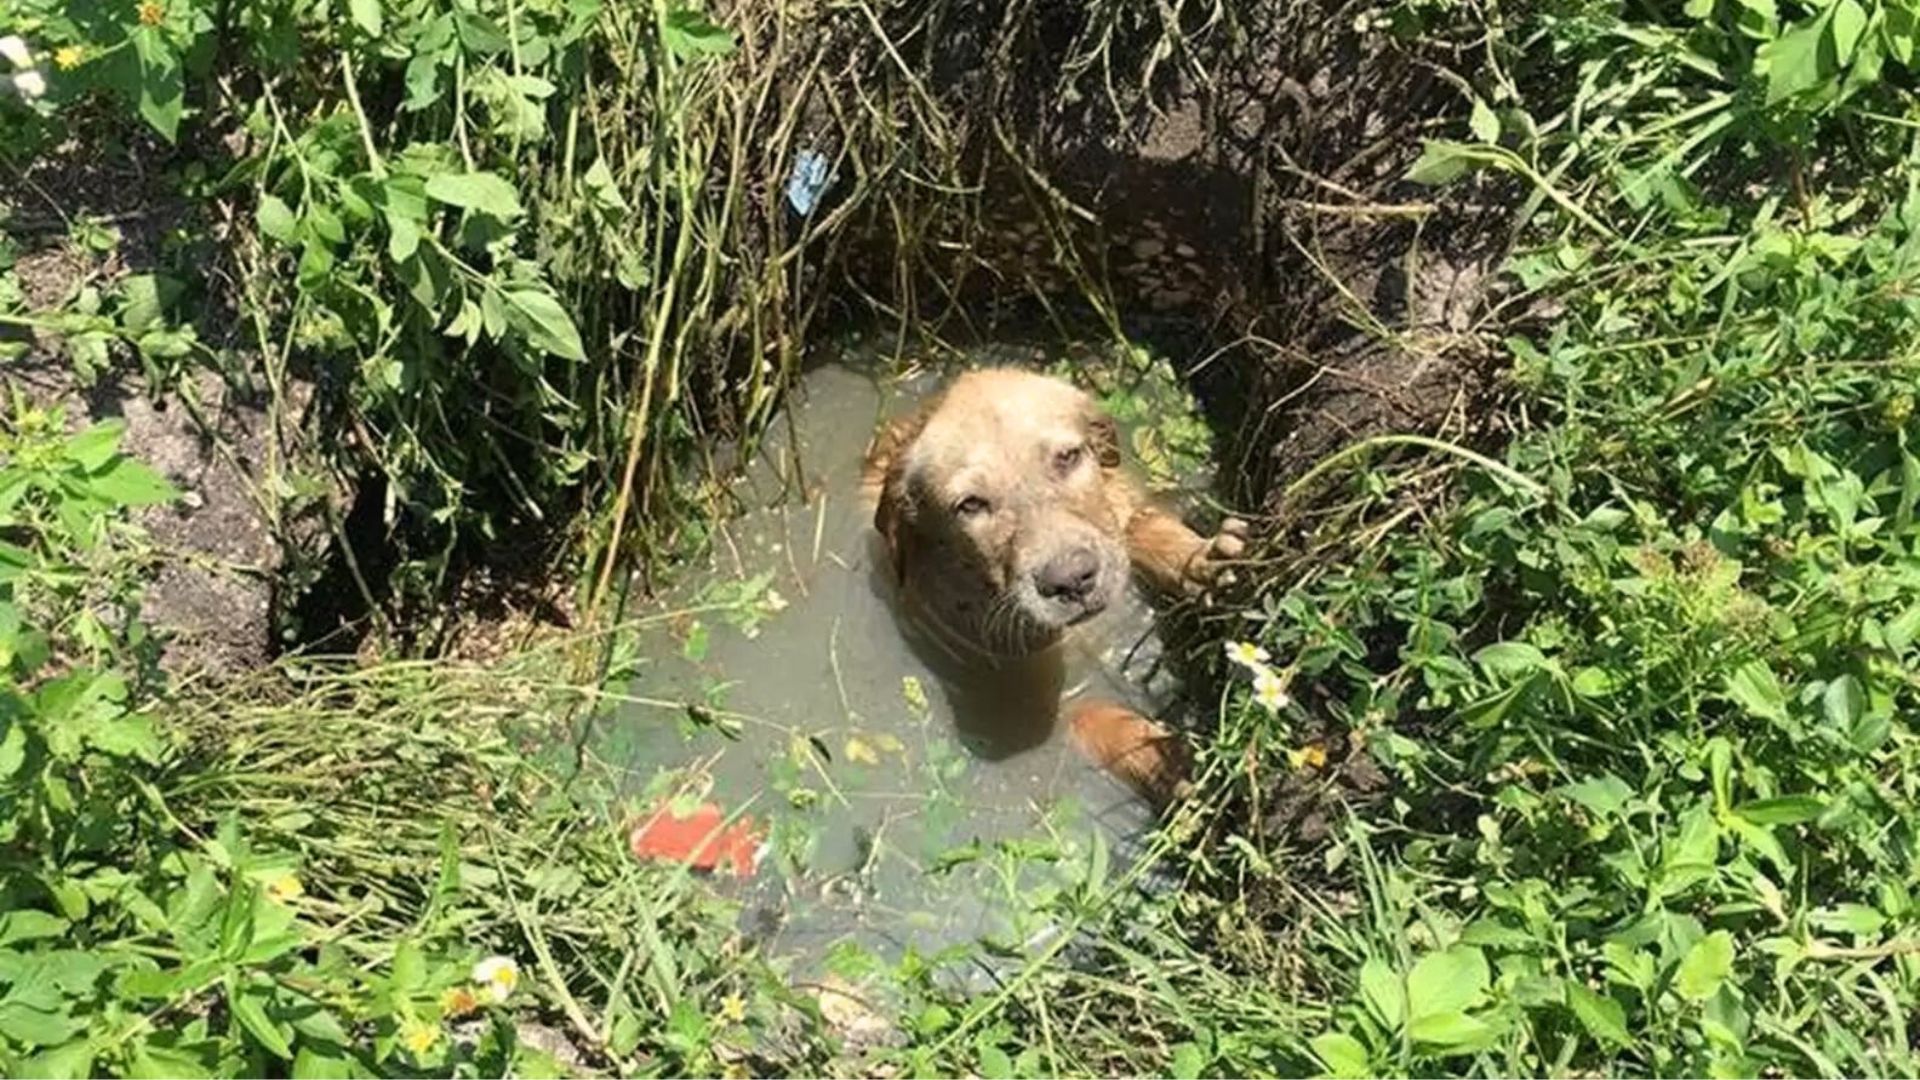 This Puppy Was Stuck In A Septic Drain Until An Officer Came And Rescued Him